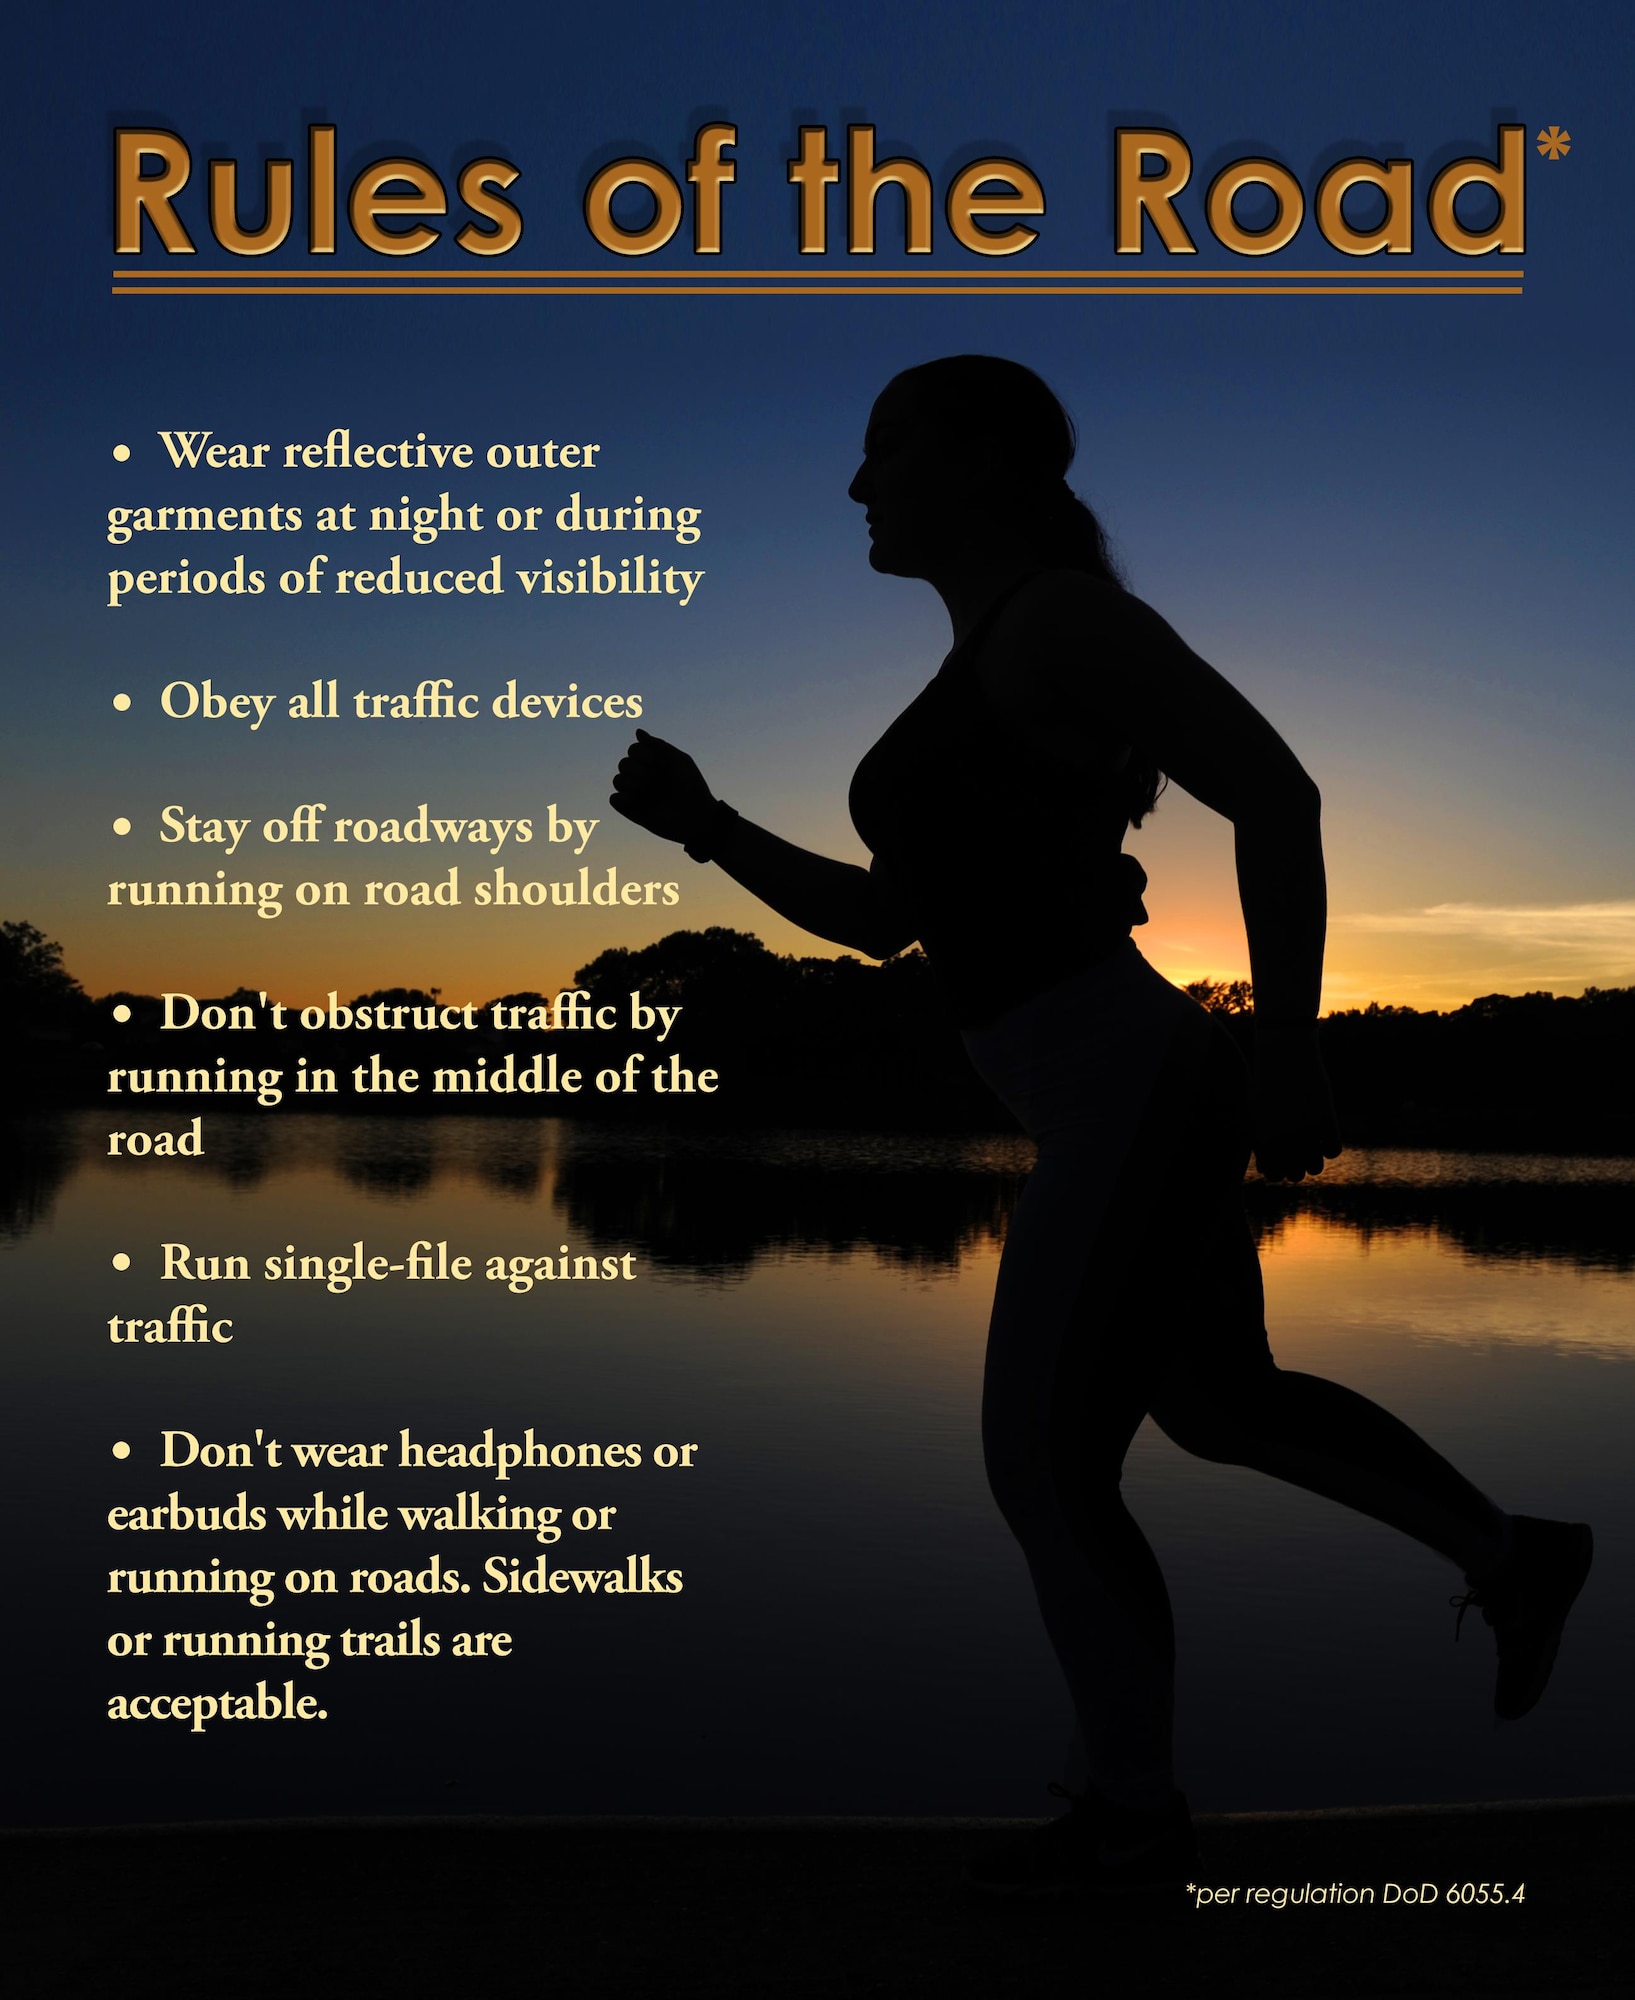 An Airman takes an evening run June 7, 2017, at Little Rock Air Force Base, Ark. Hazards on the road add to the danger of running near vehicles, such as uneven ground and road edges; staying alert is fundamental to preventing possible incidents. (U.S. Air Force graphic by Airman 1st Class Grace Nichols)